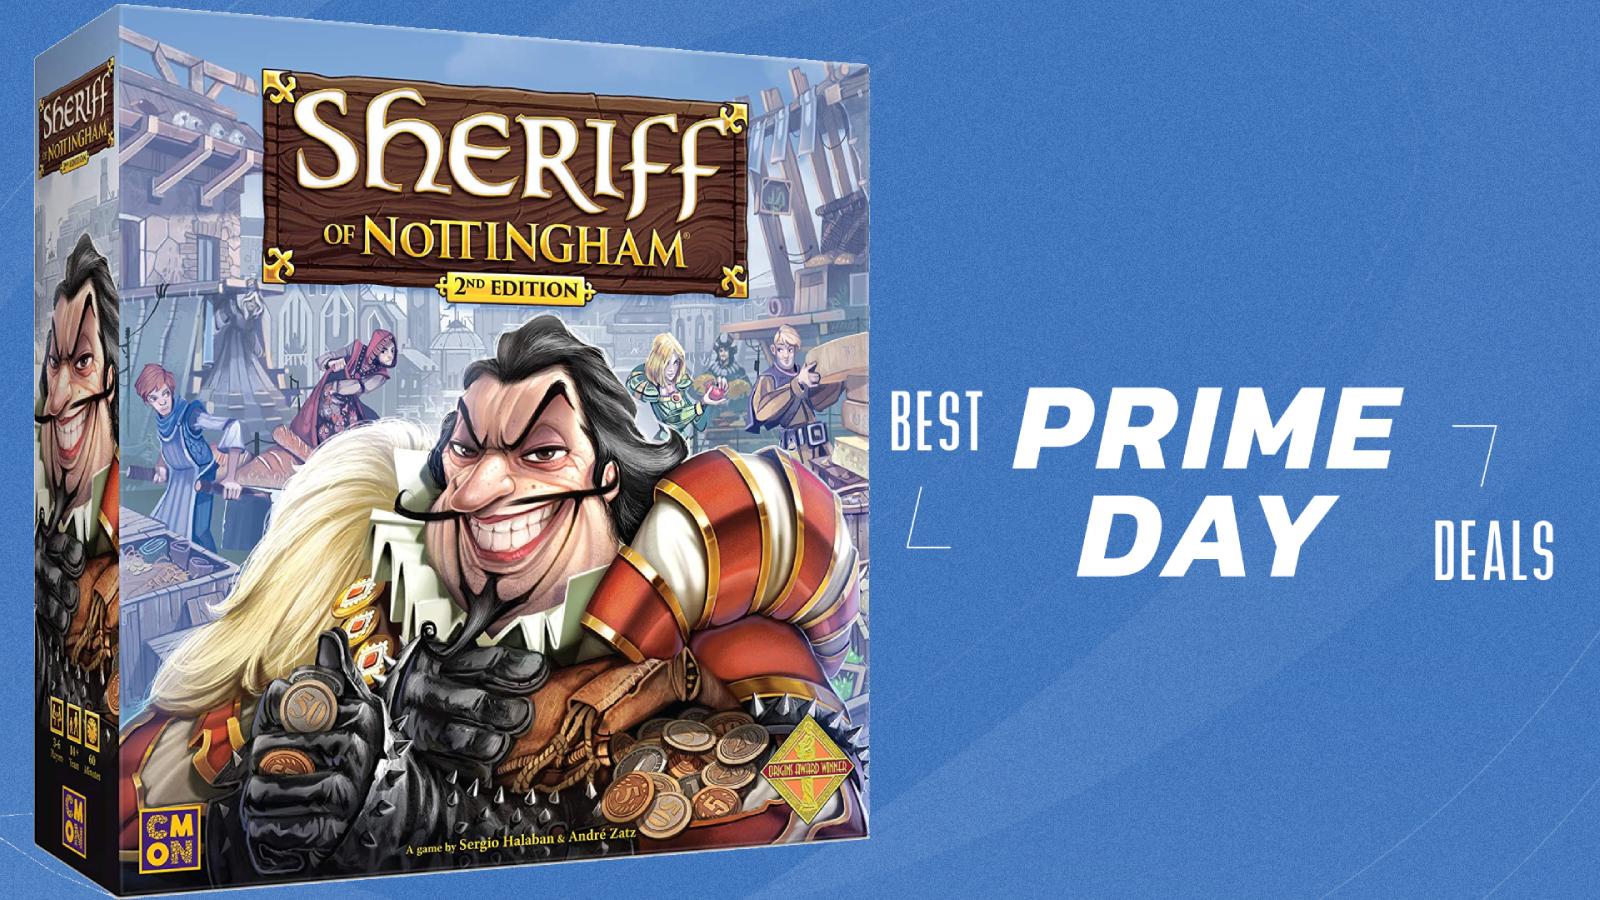 Sheriff of nottingham on a Blue Prime Day background